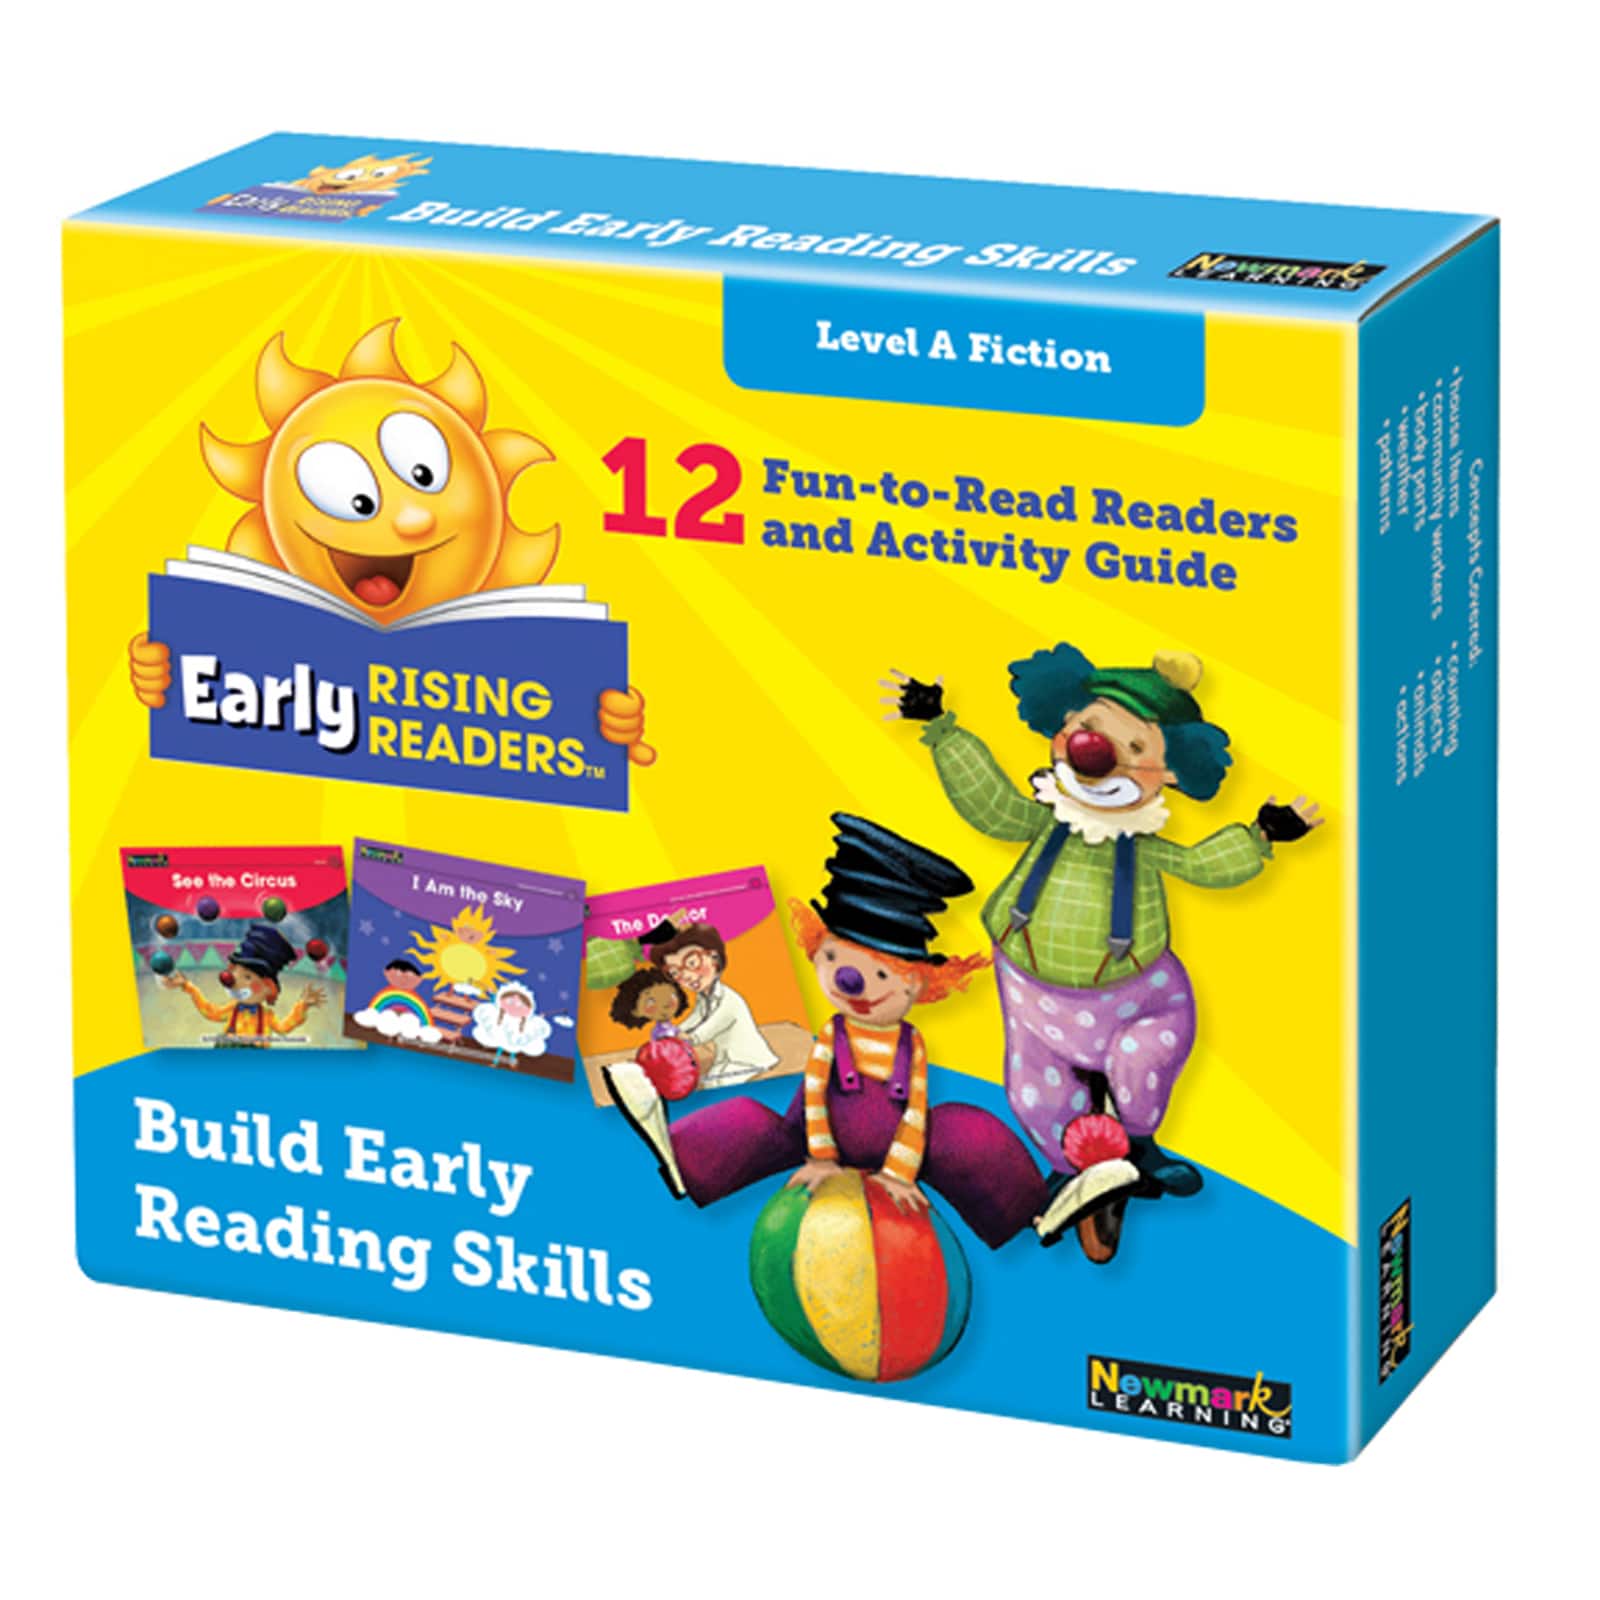 Newmark Learning&#xAE; Early Rising Readers Set 4: Level A Fiction